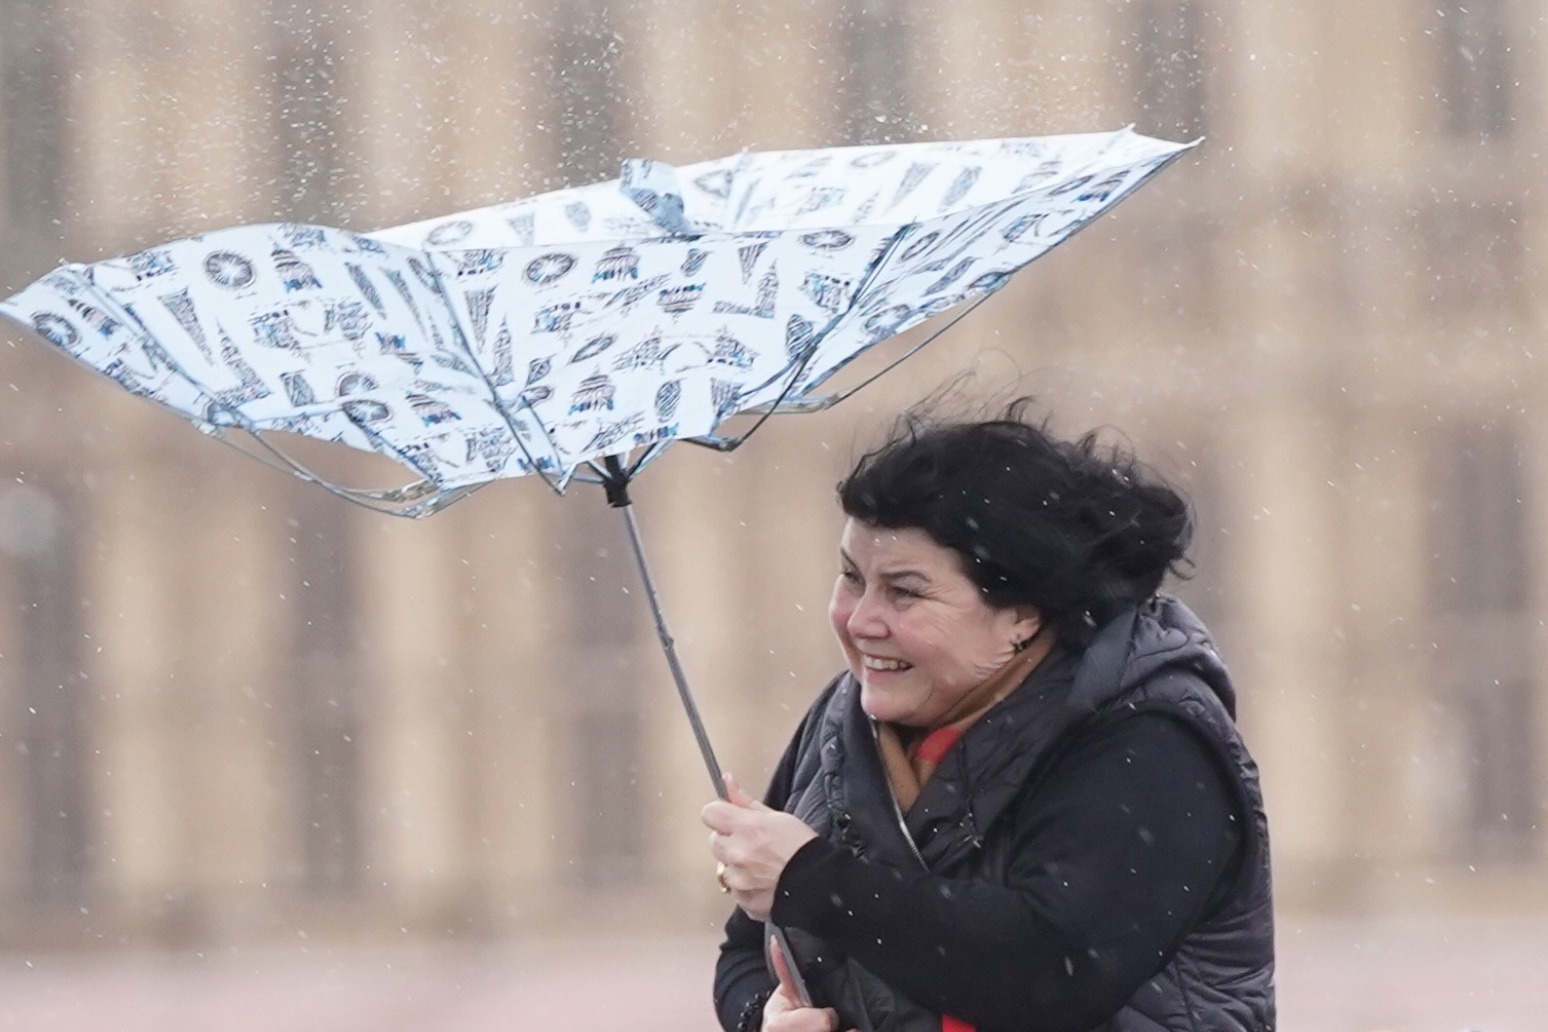 Next few days will be ‘very challenging’ due to storms, Scots warned 